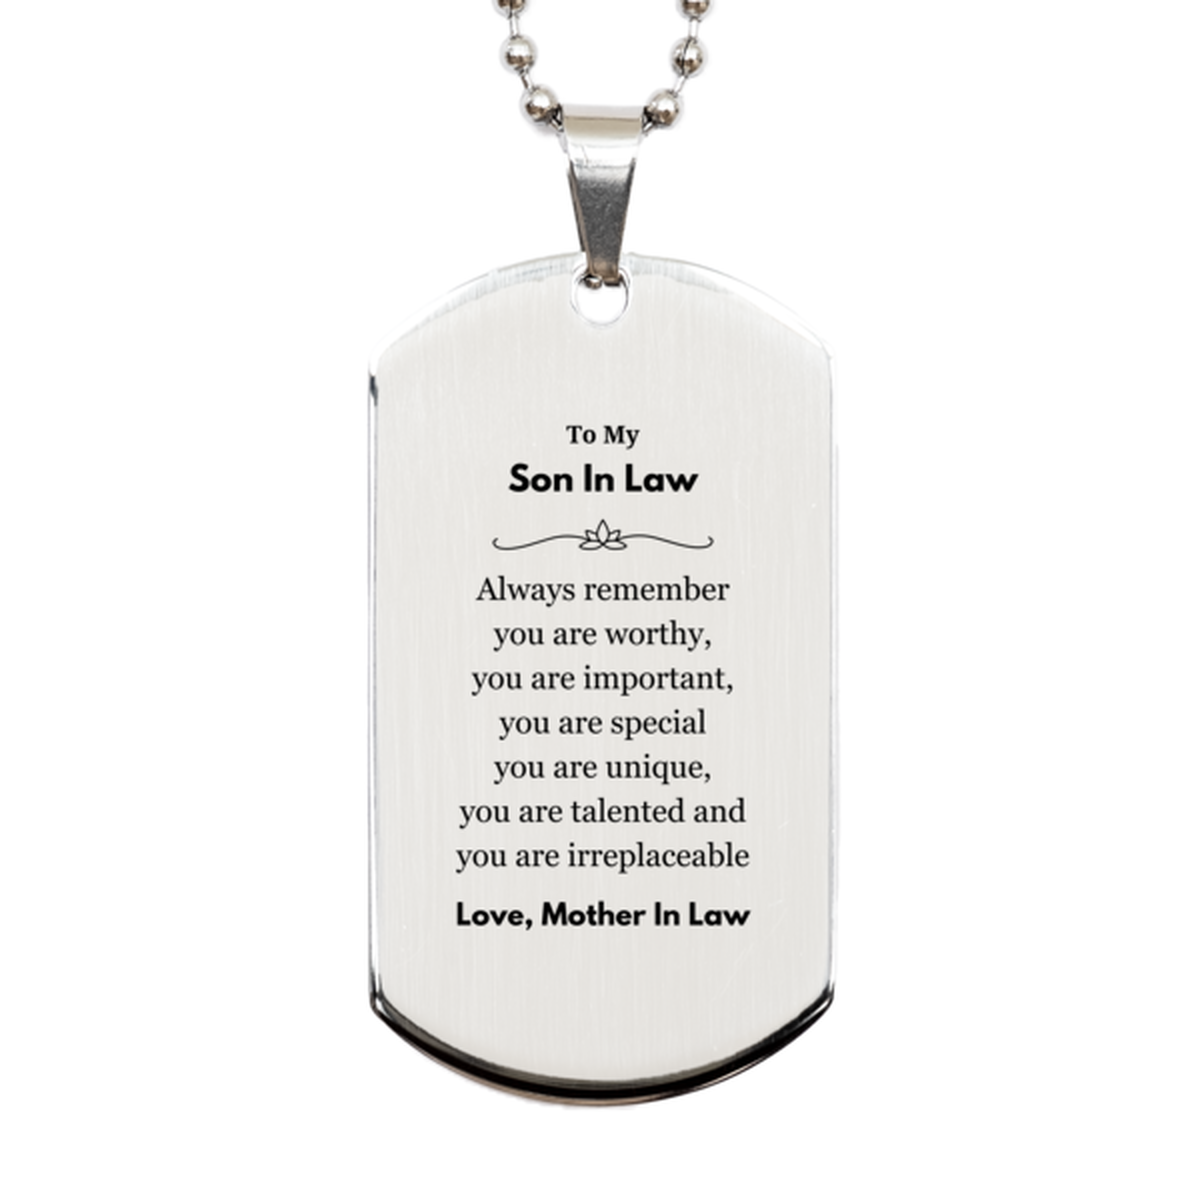 Son In Law Birthday Gifts from Mother In Law, Inspirational Silver Dog Tag for Son In Law Christmas Graduation Gifts for Son In Law Always remember you are worthy, you are important. Love, Mother In Law